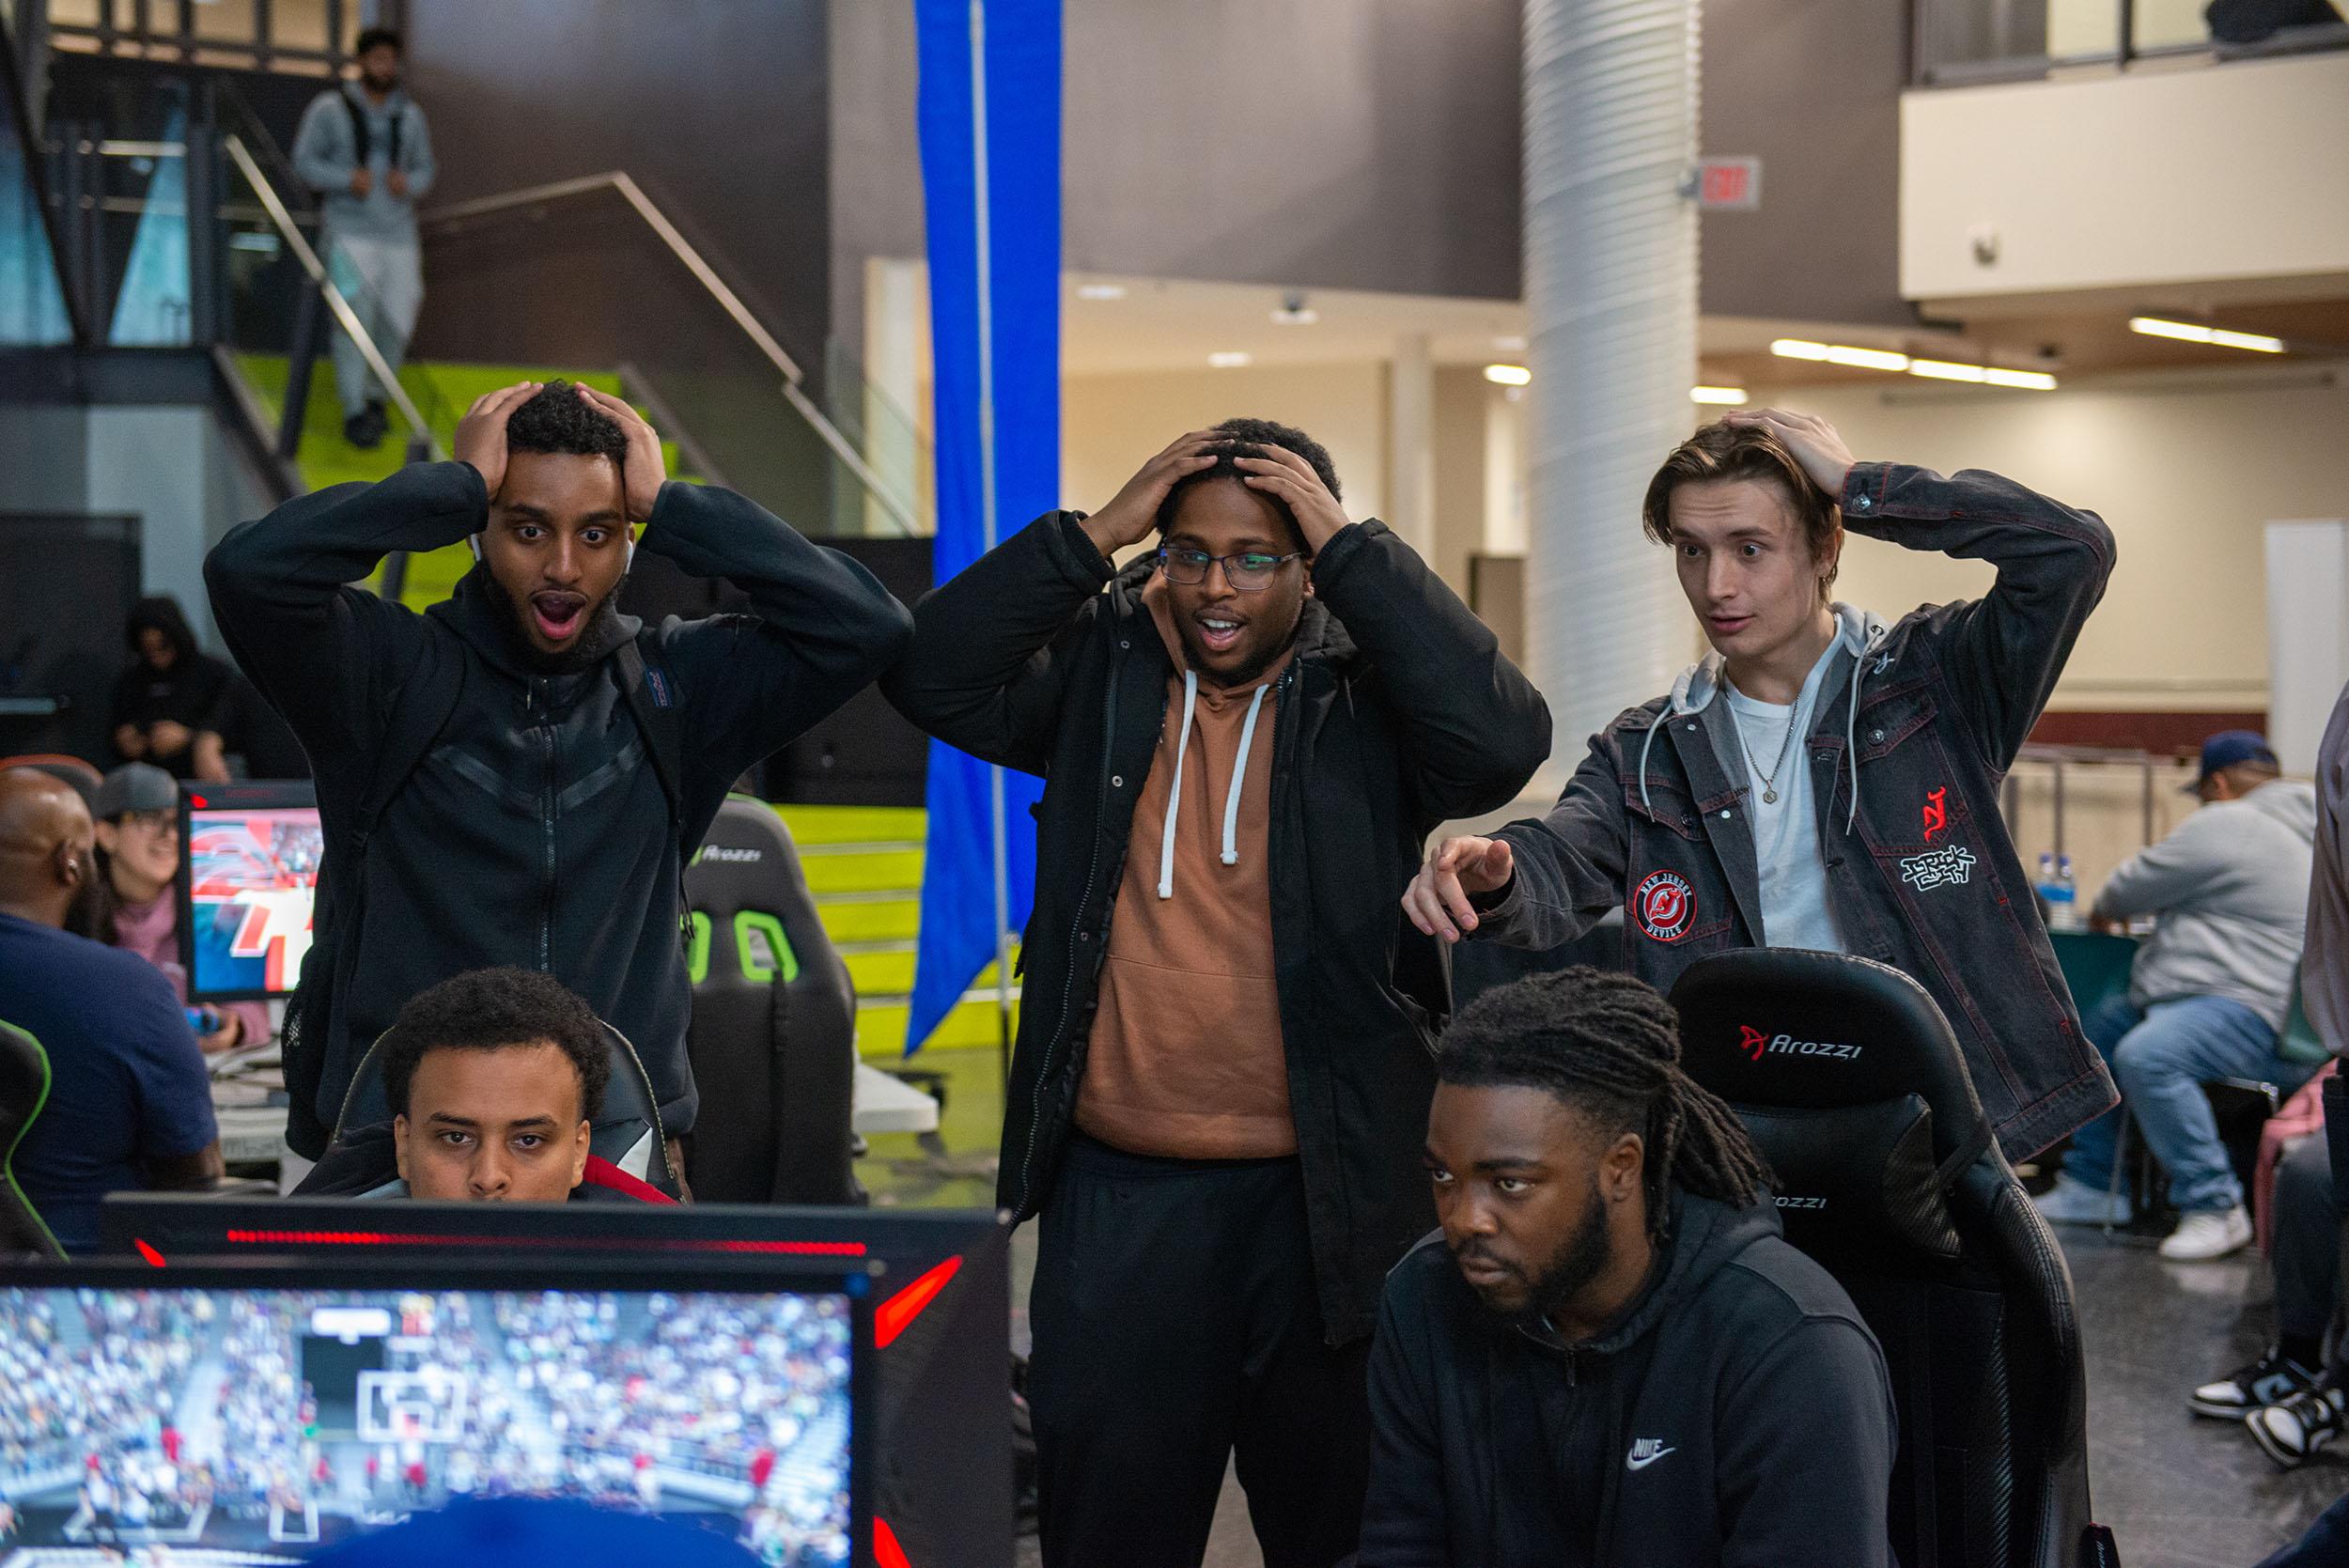 Three people put their hands on their head in astonishment while watching others play video games.